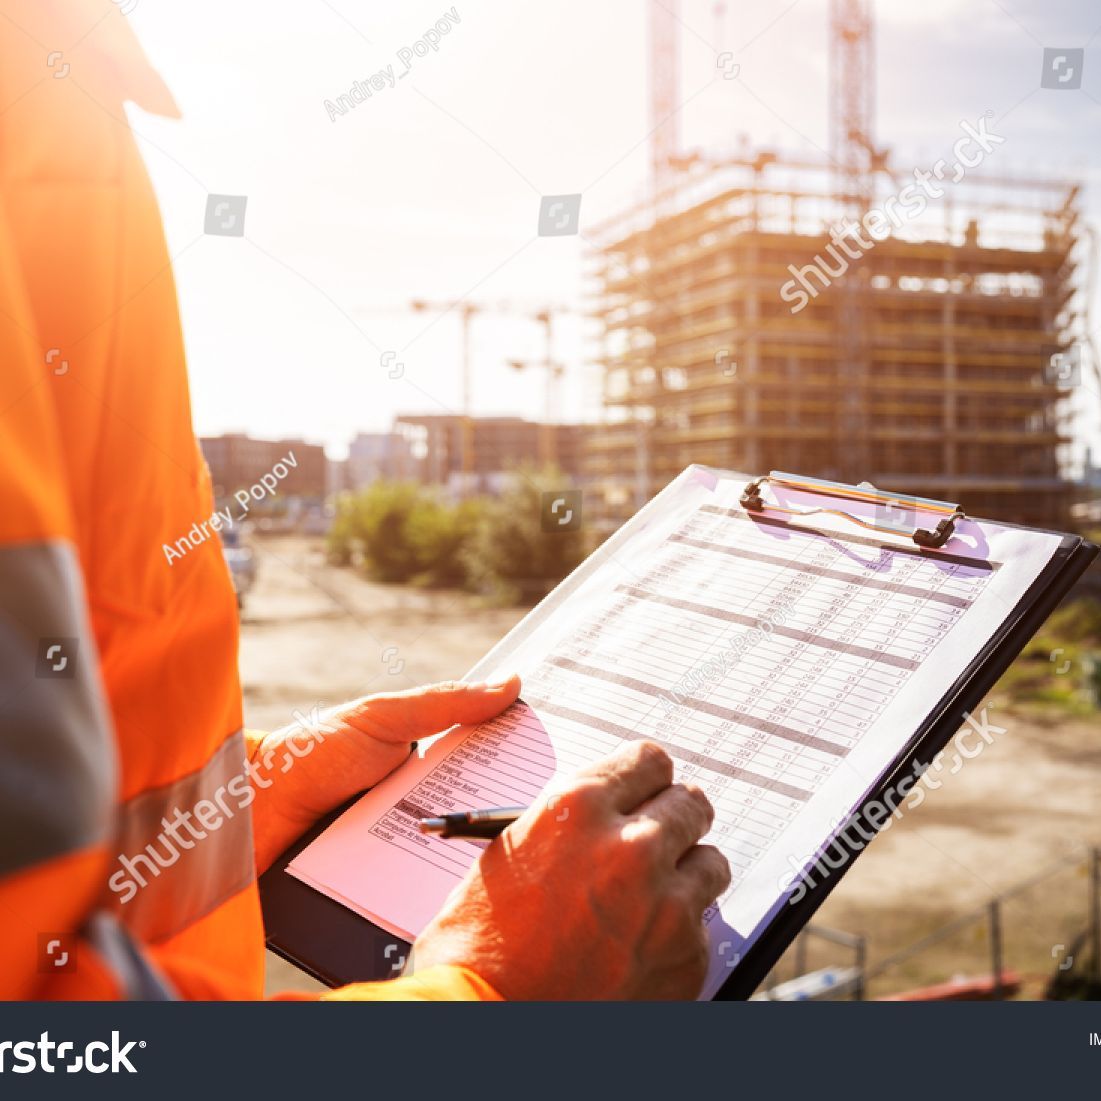 A construction worker is holding a clipboard and writing on it.